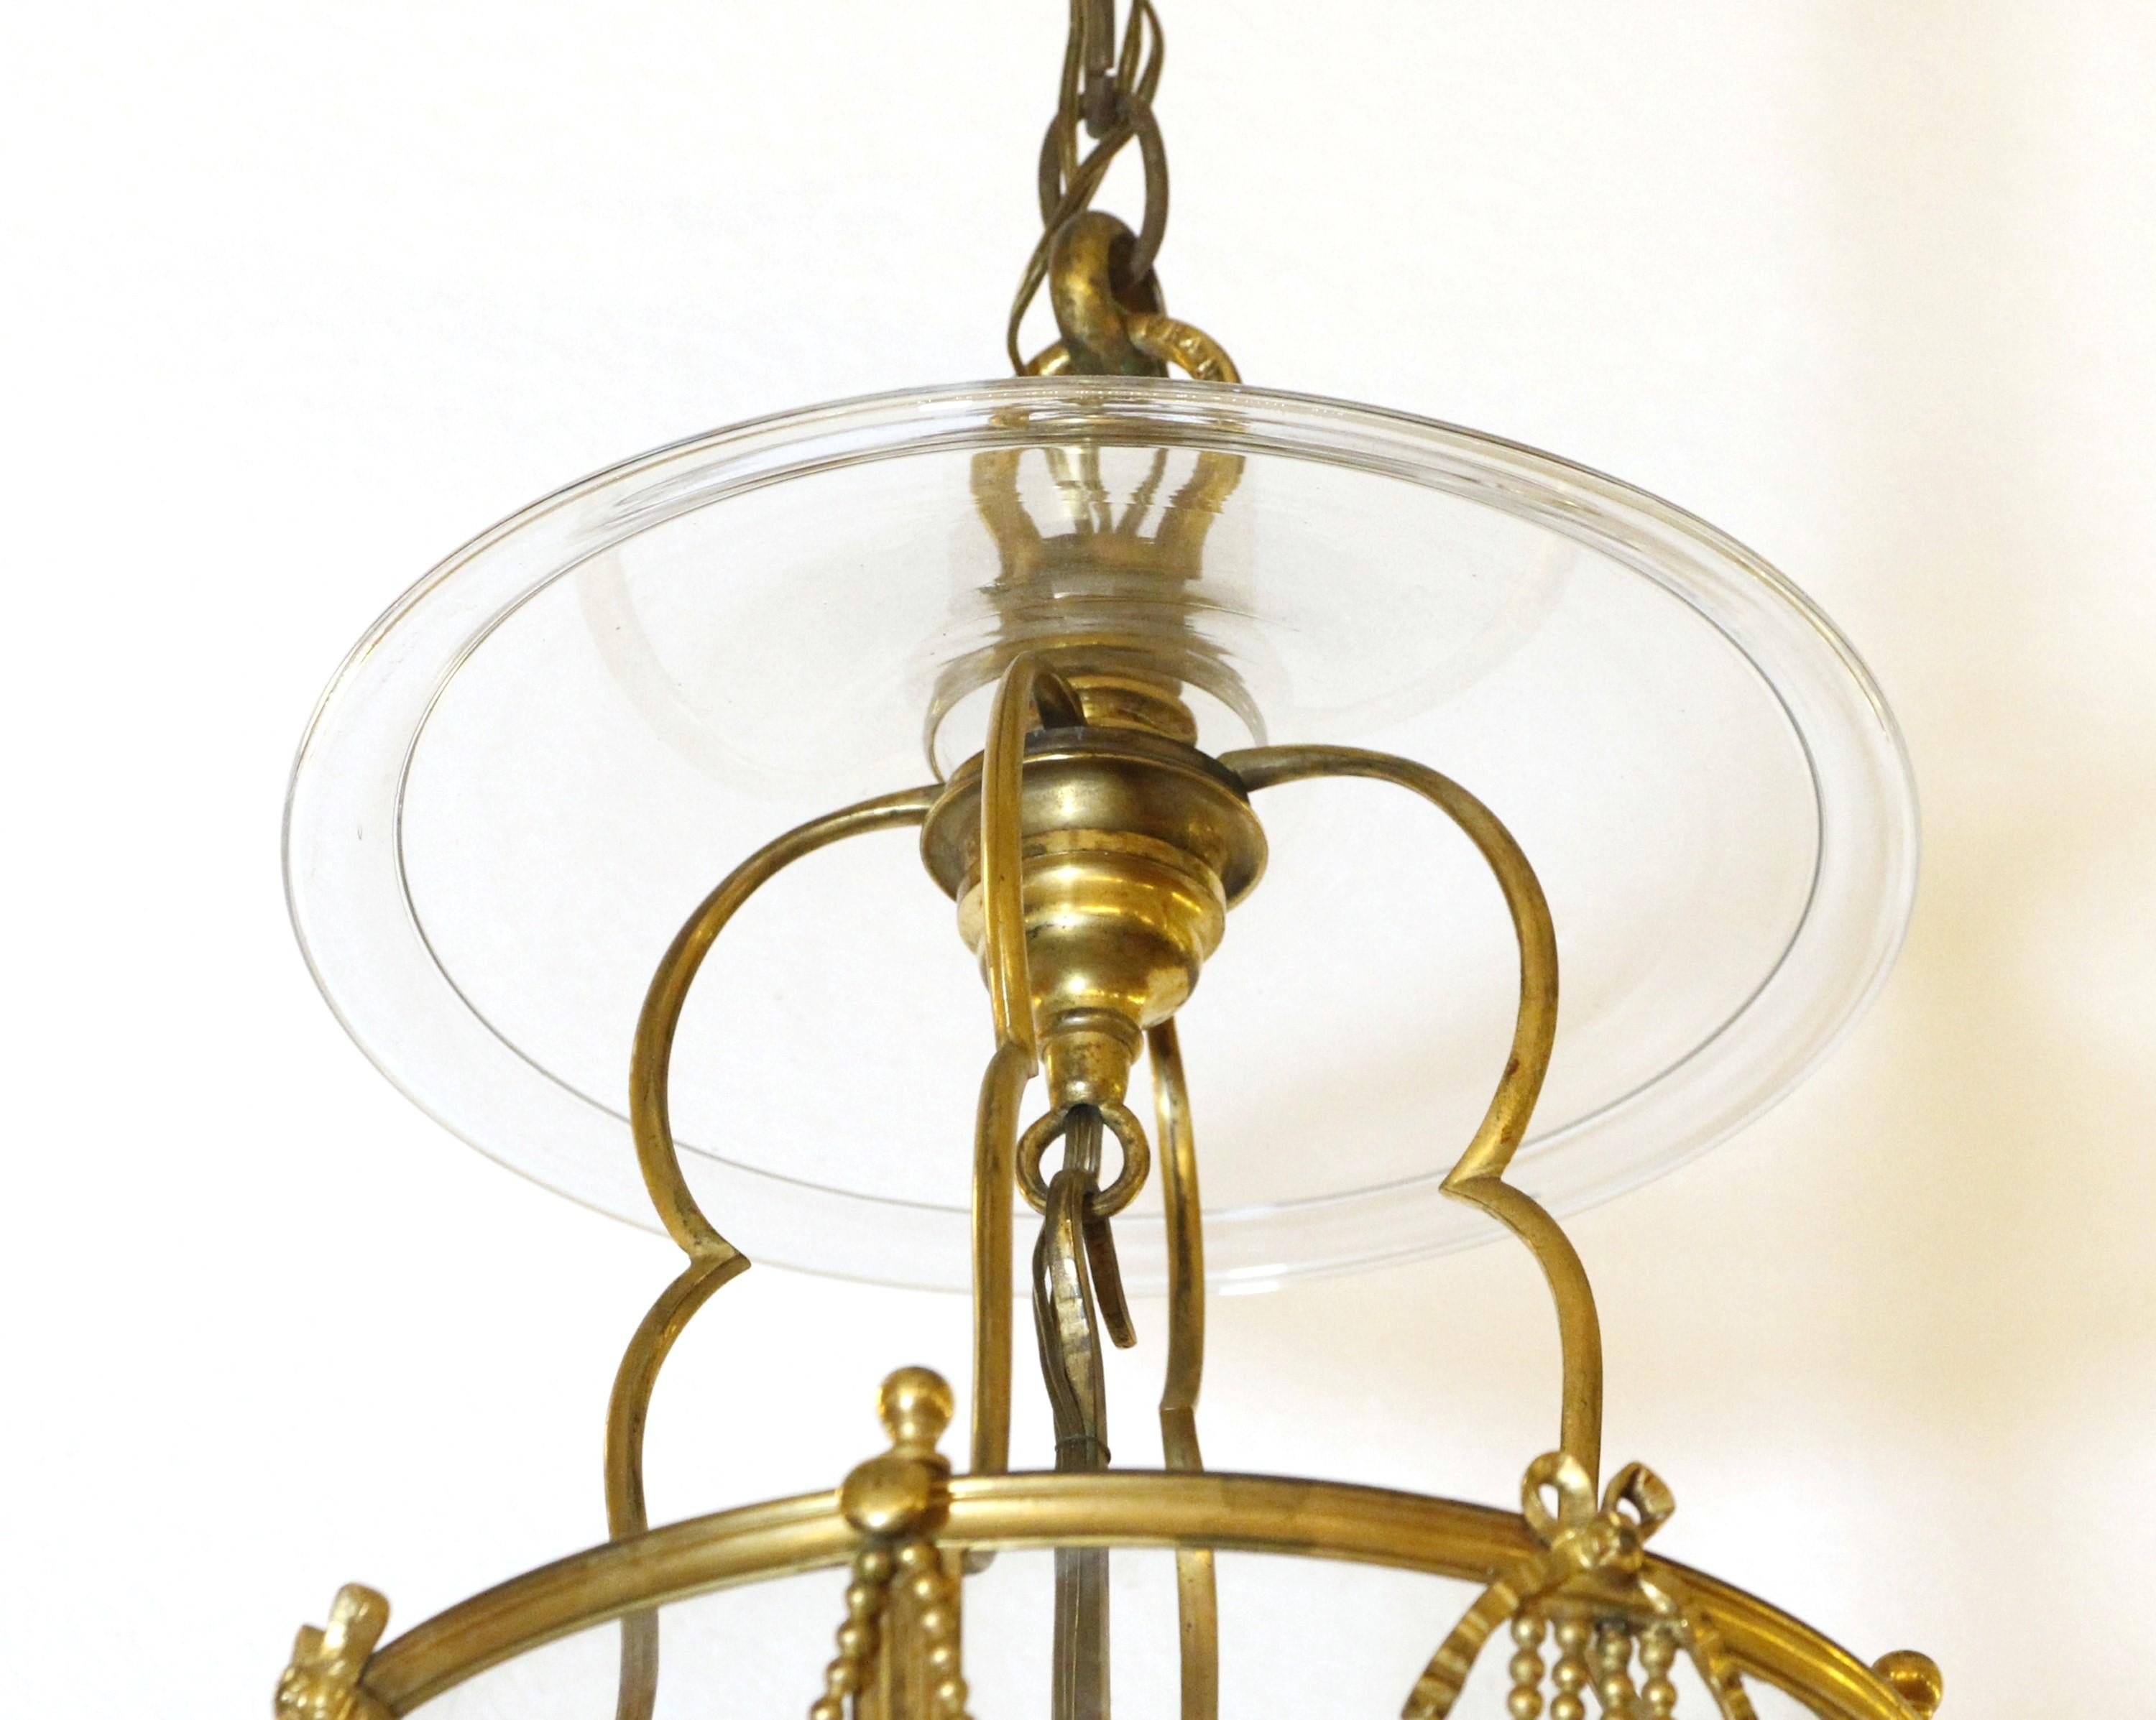 Gilt French Gilded Lantern Light - 3-Arms w/ Tassels & Ribbons For Sale